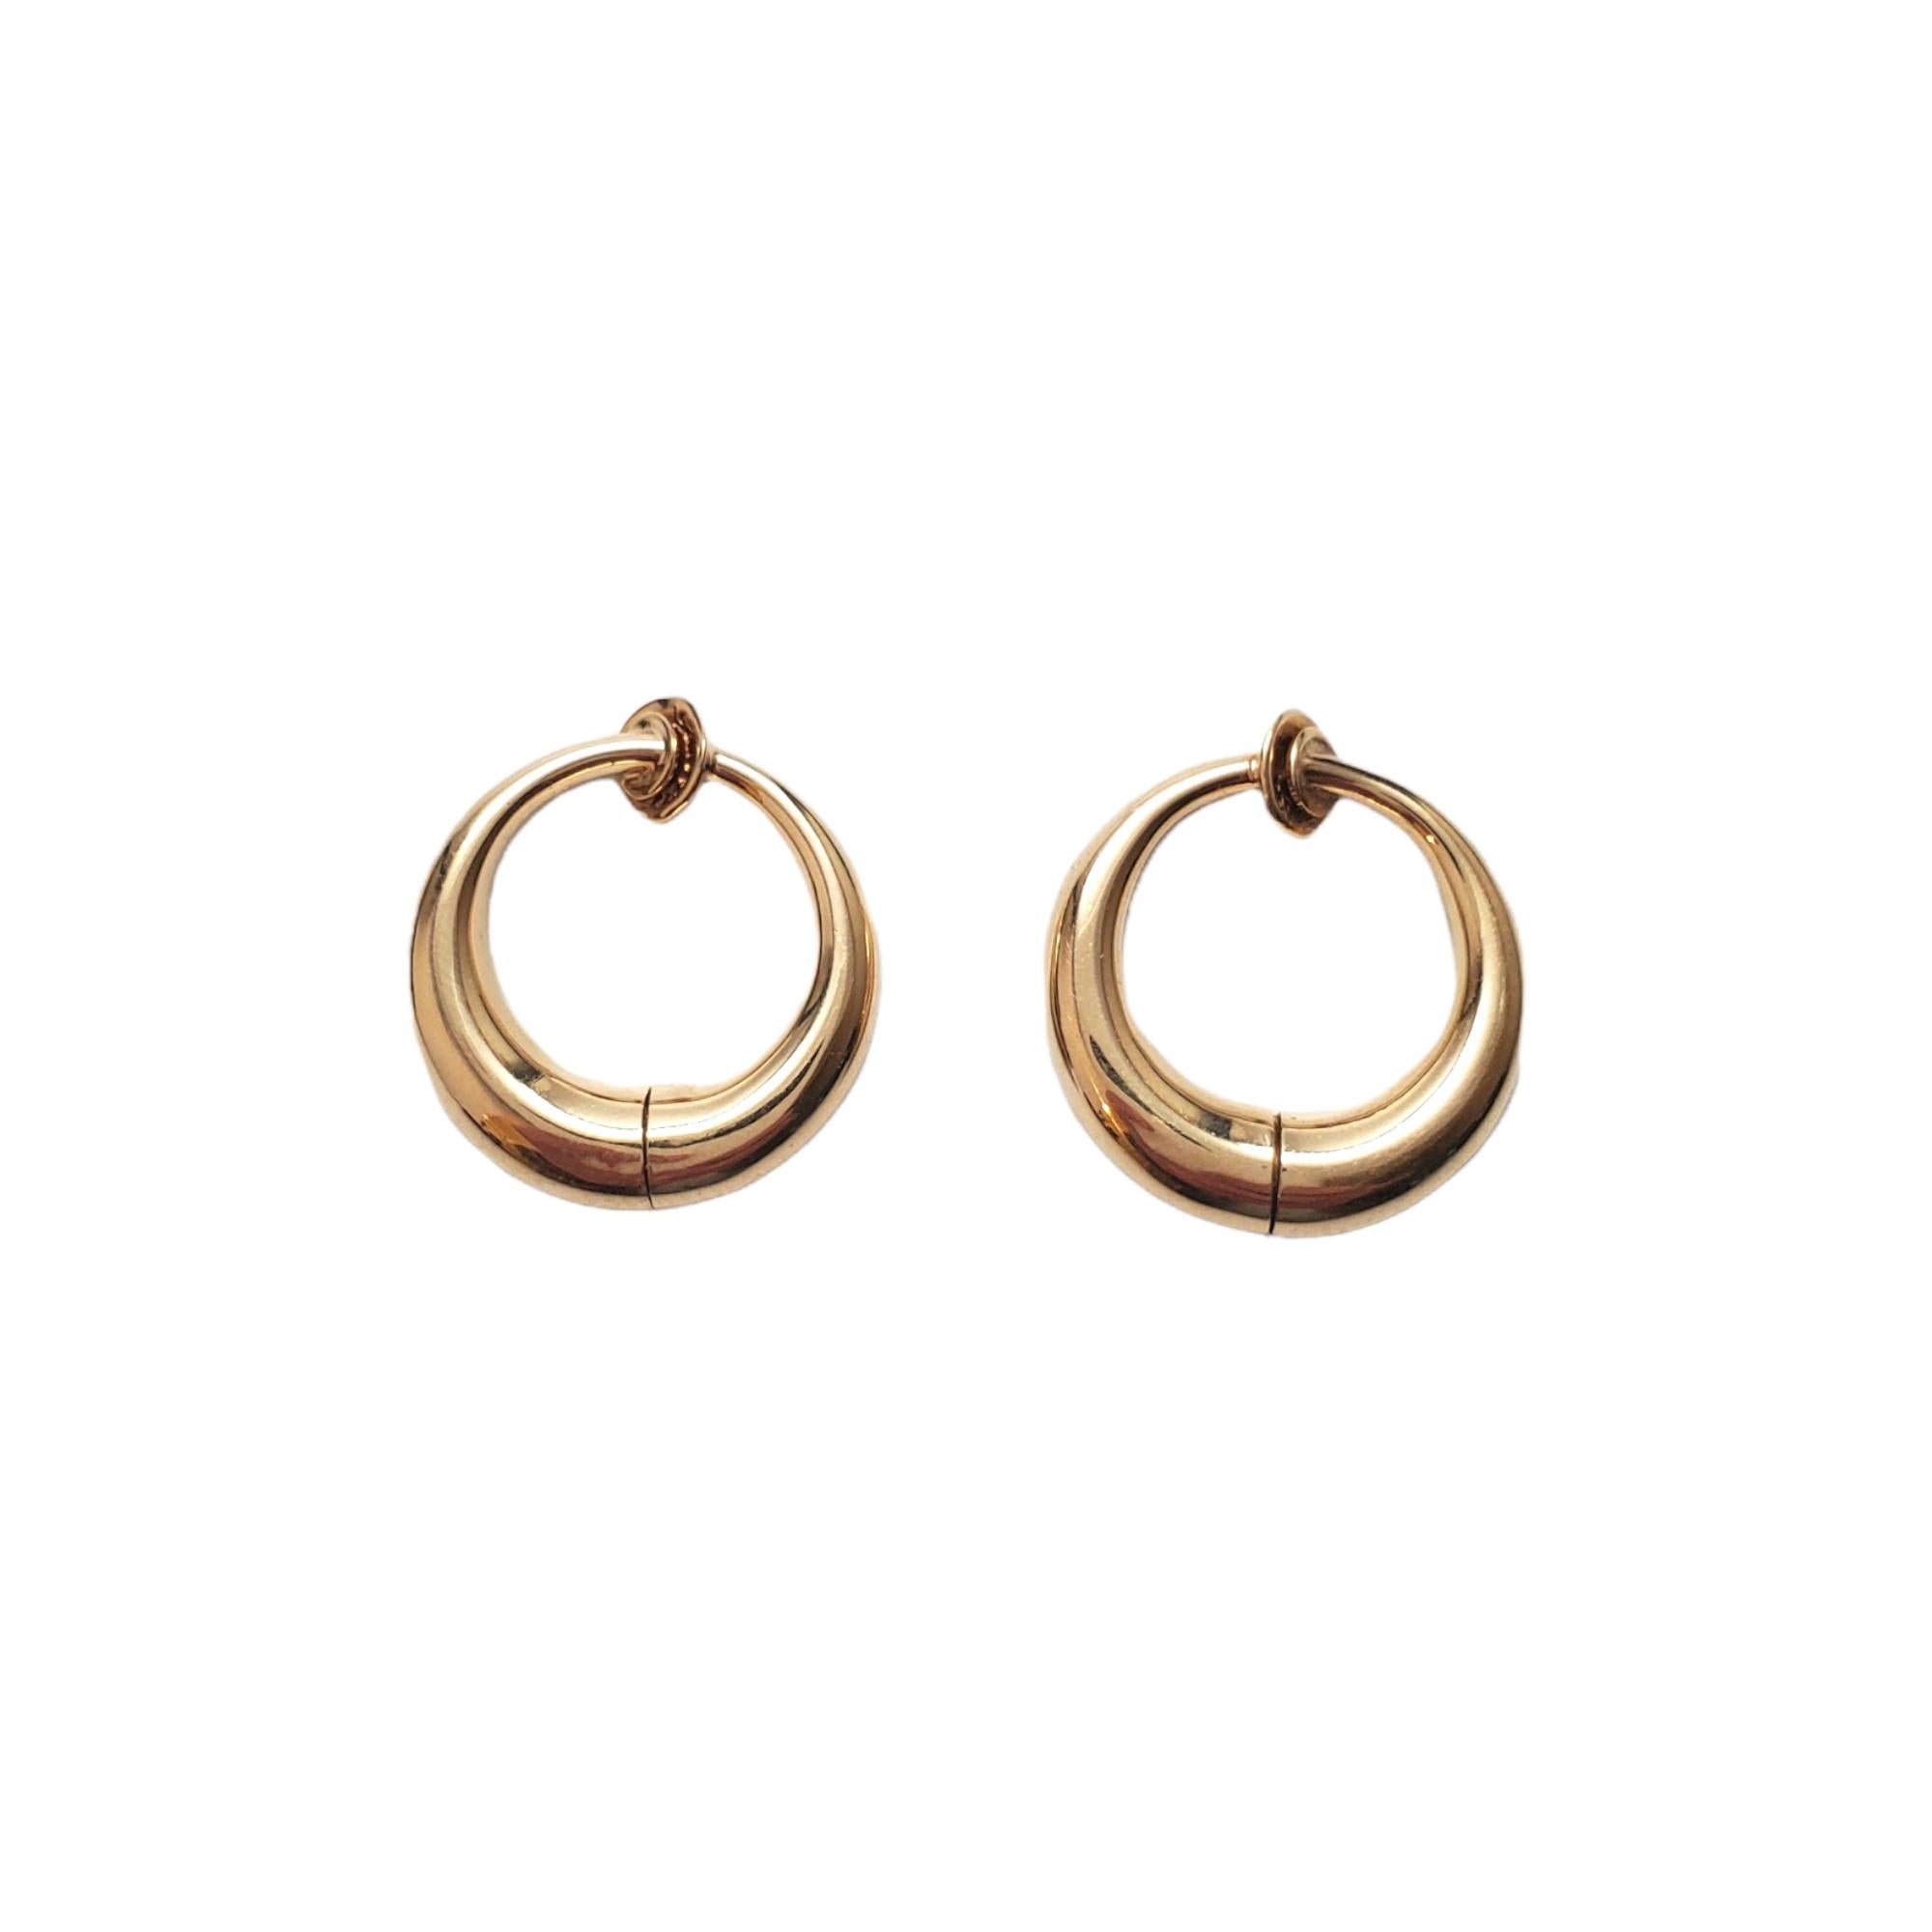 14K Yellow Gold Clip On Hoops

These gorgeous clip on hoops are designed in 14K yellow gold.

These earrings are hinged at bottom so that the top slides open to be placed on the ear. 

Size: 18.75 mm X 17.11 mm

Weight: 4.0 g/ 2.5 dwt.

Hallmark: